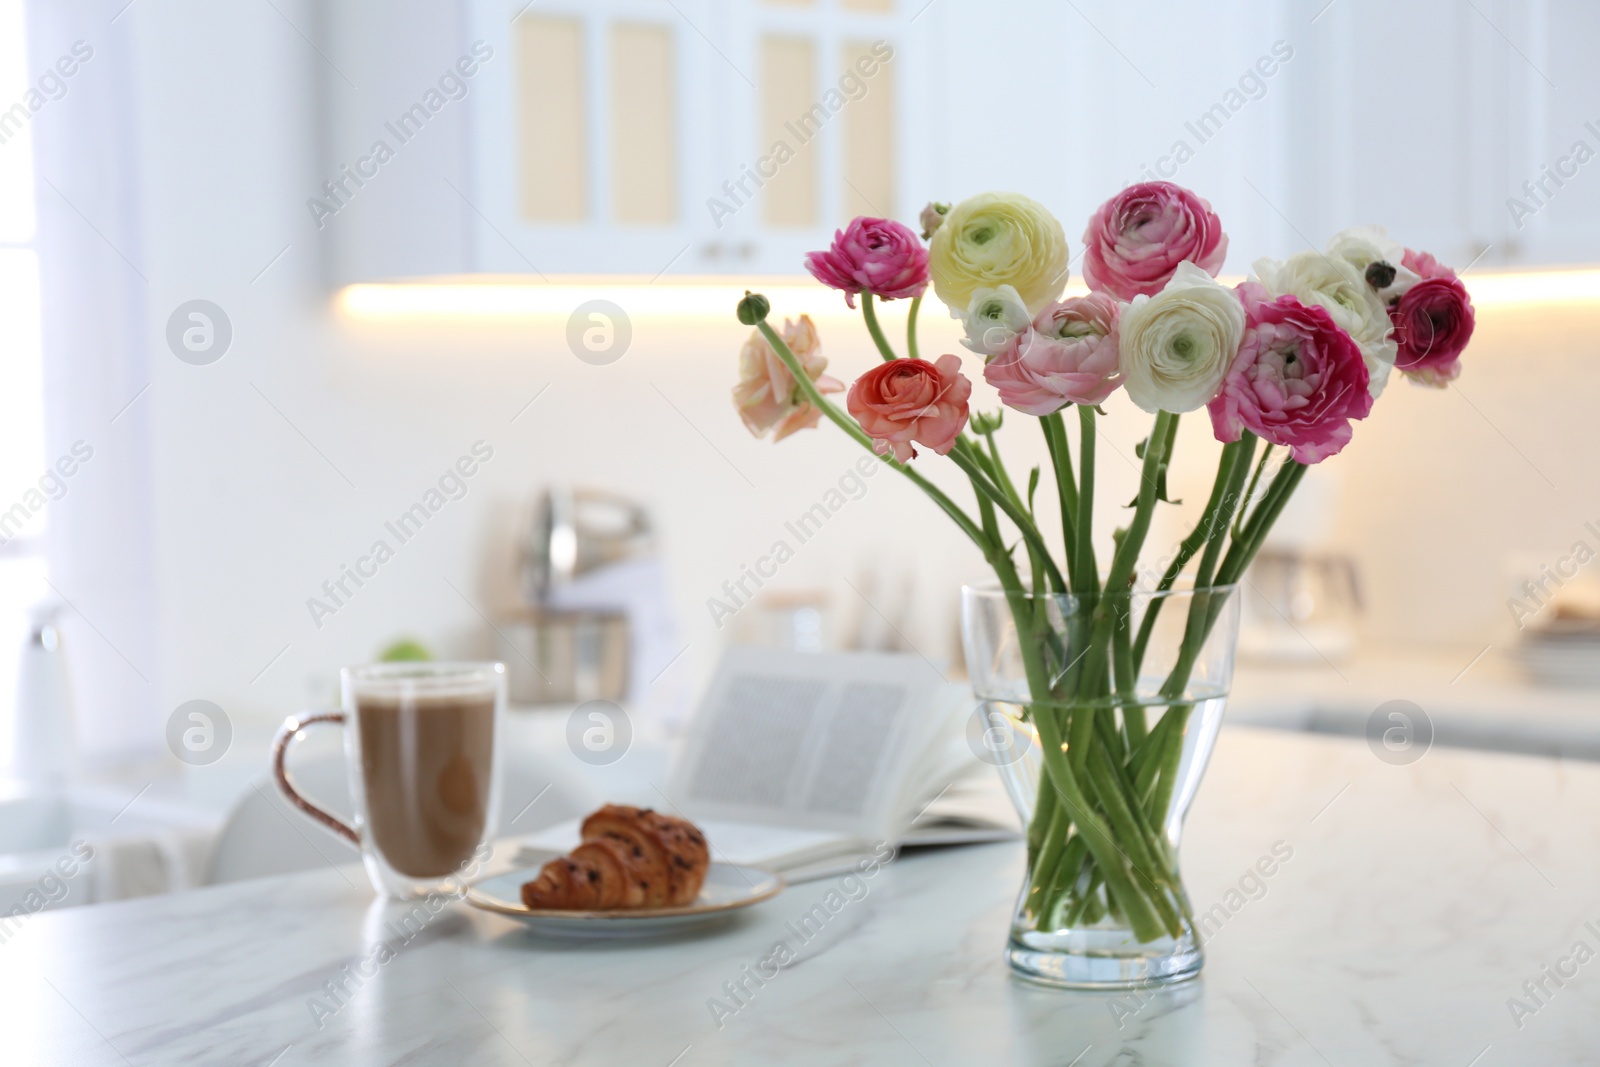 Photo of Beautiful fresh ranunculus flowers near cup of coffee, croissant and book on table in kitchen